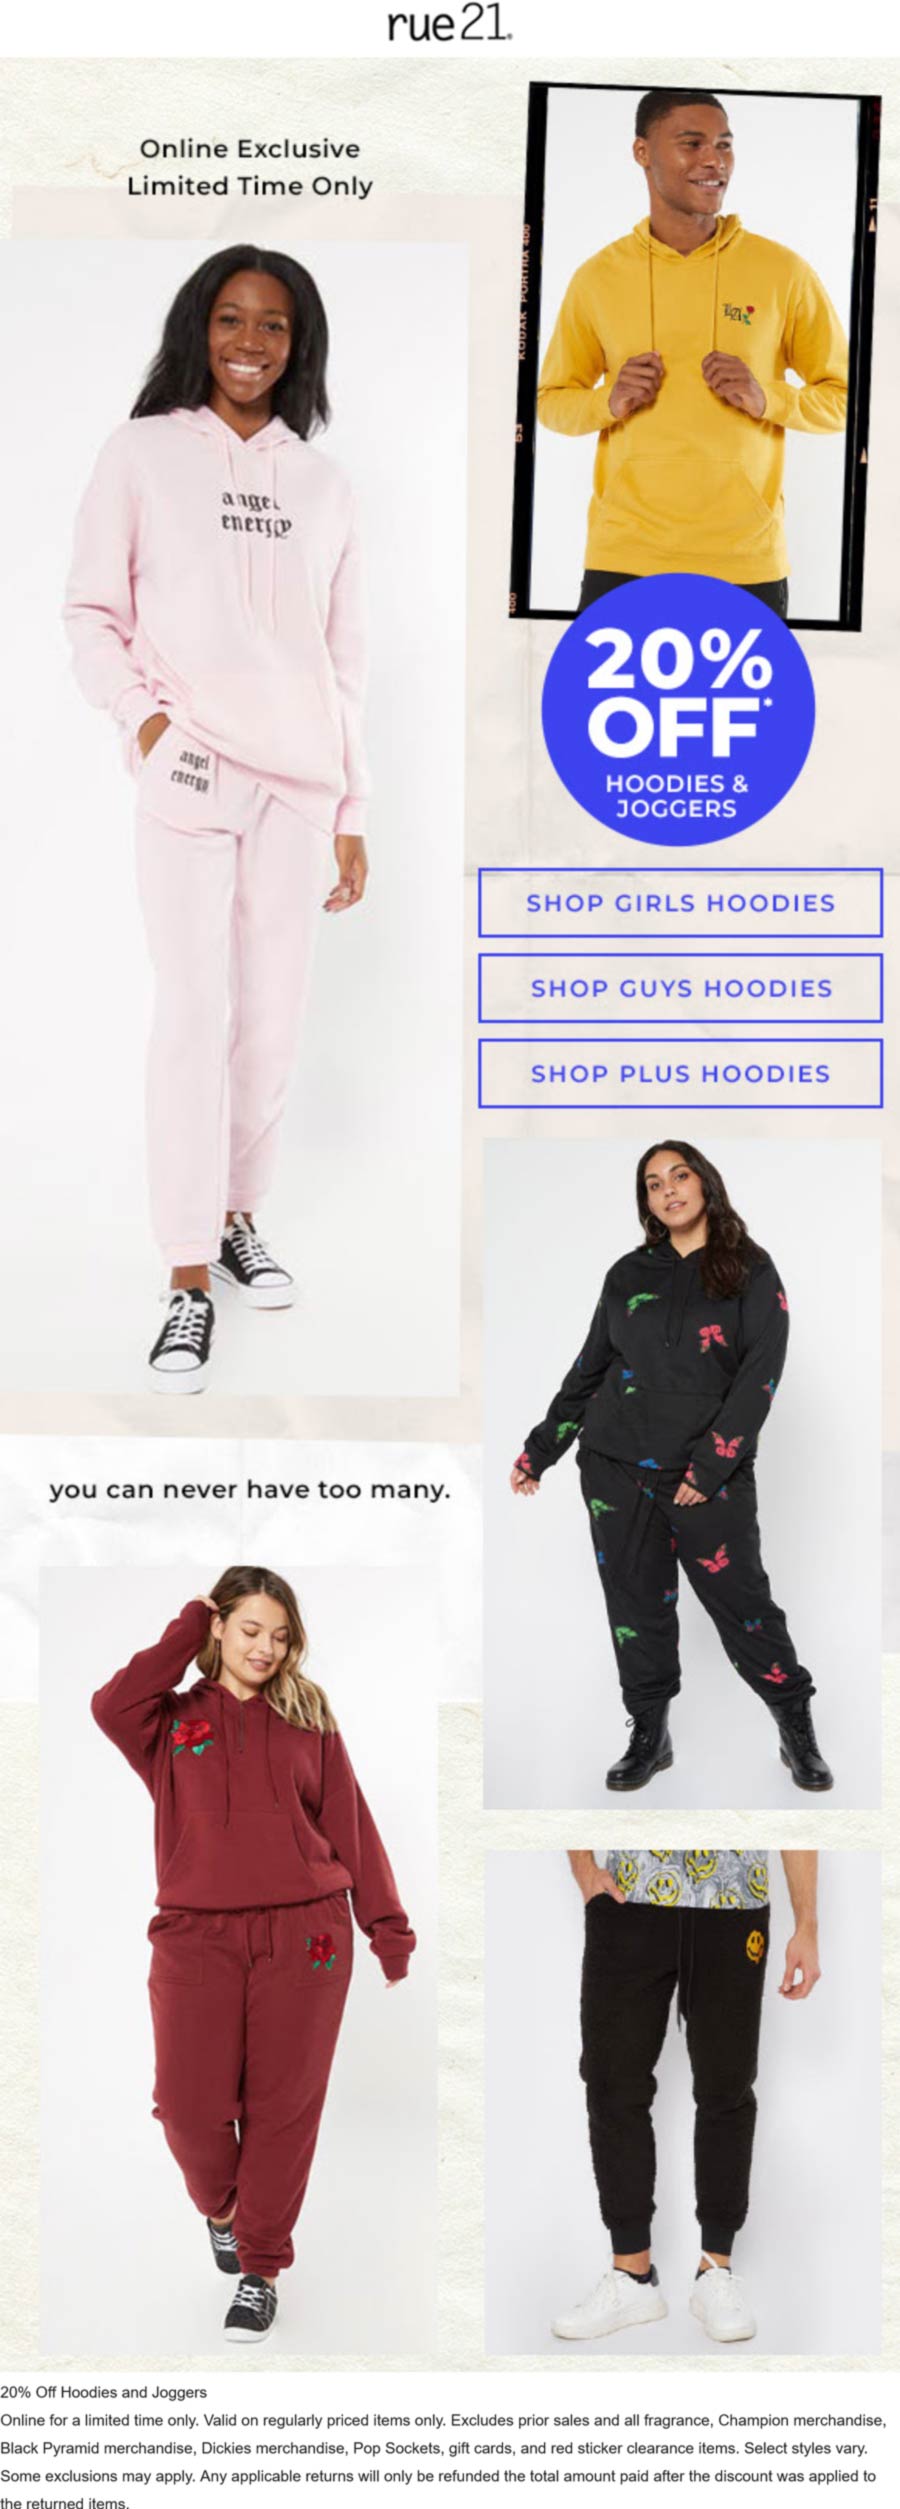 rue21 stores Coupon  20% off hoodies & joggers online at rue21 #rue21 